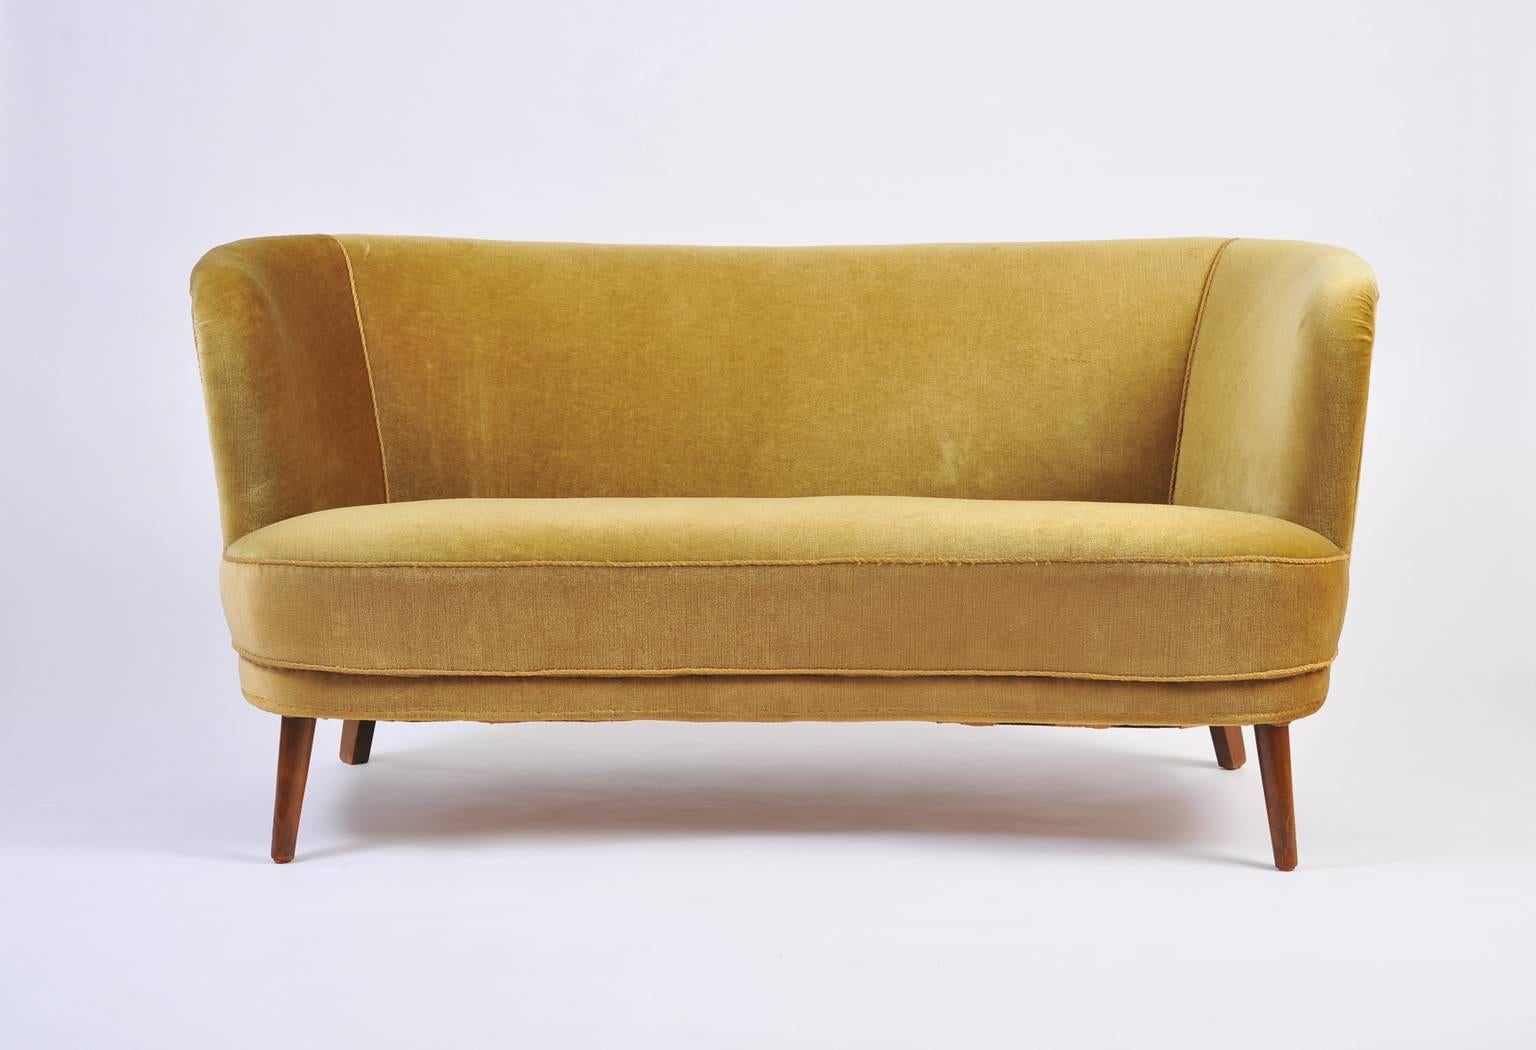 A curved sofa, in its original mohair velvet upholstery, on four tapered beechwood legs
Sweden, circa 1940.